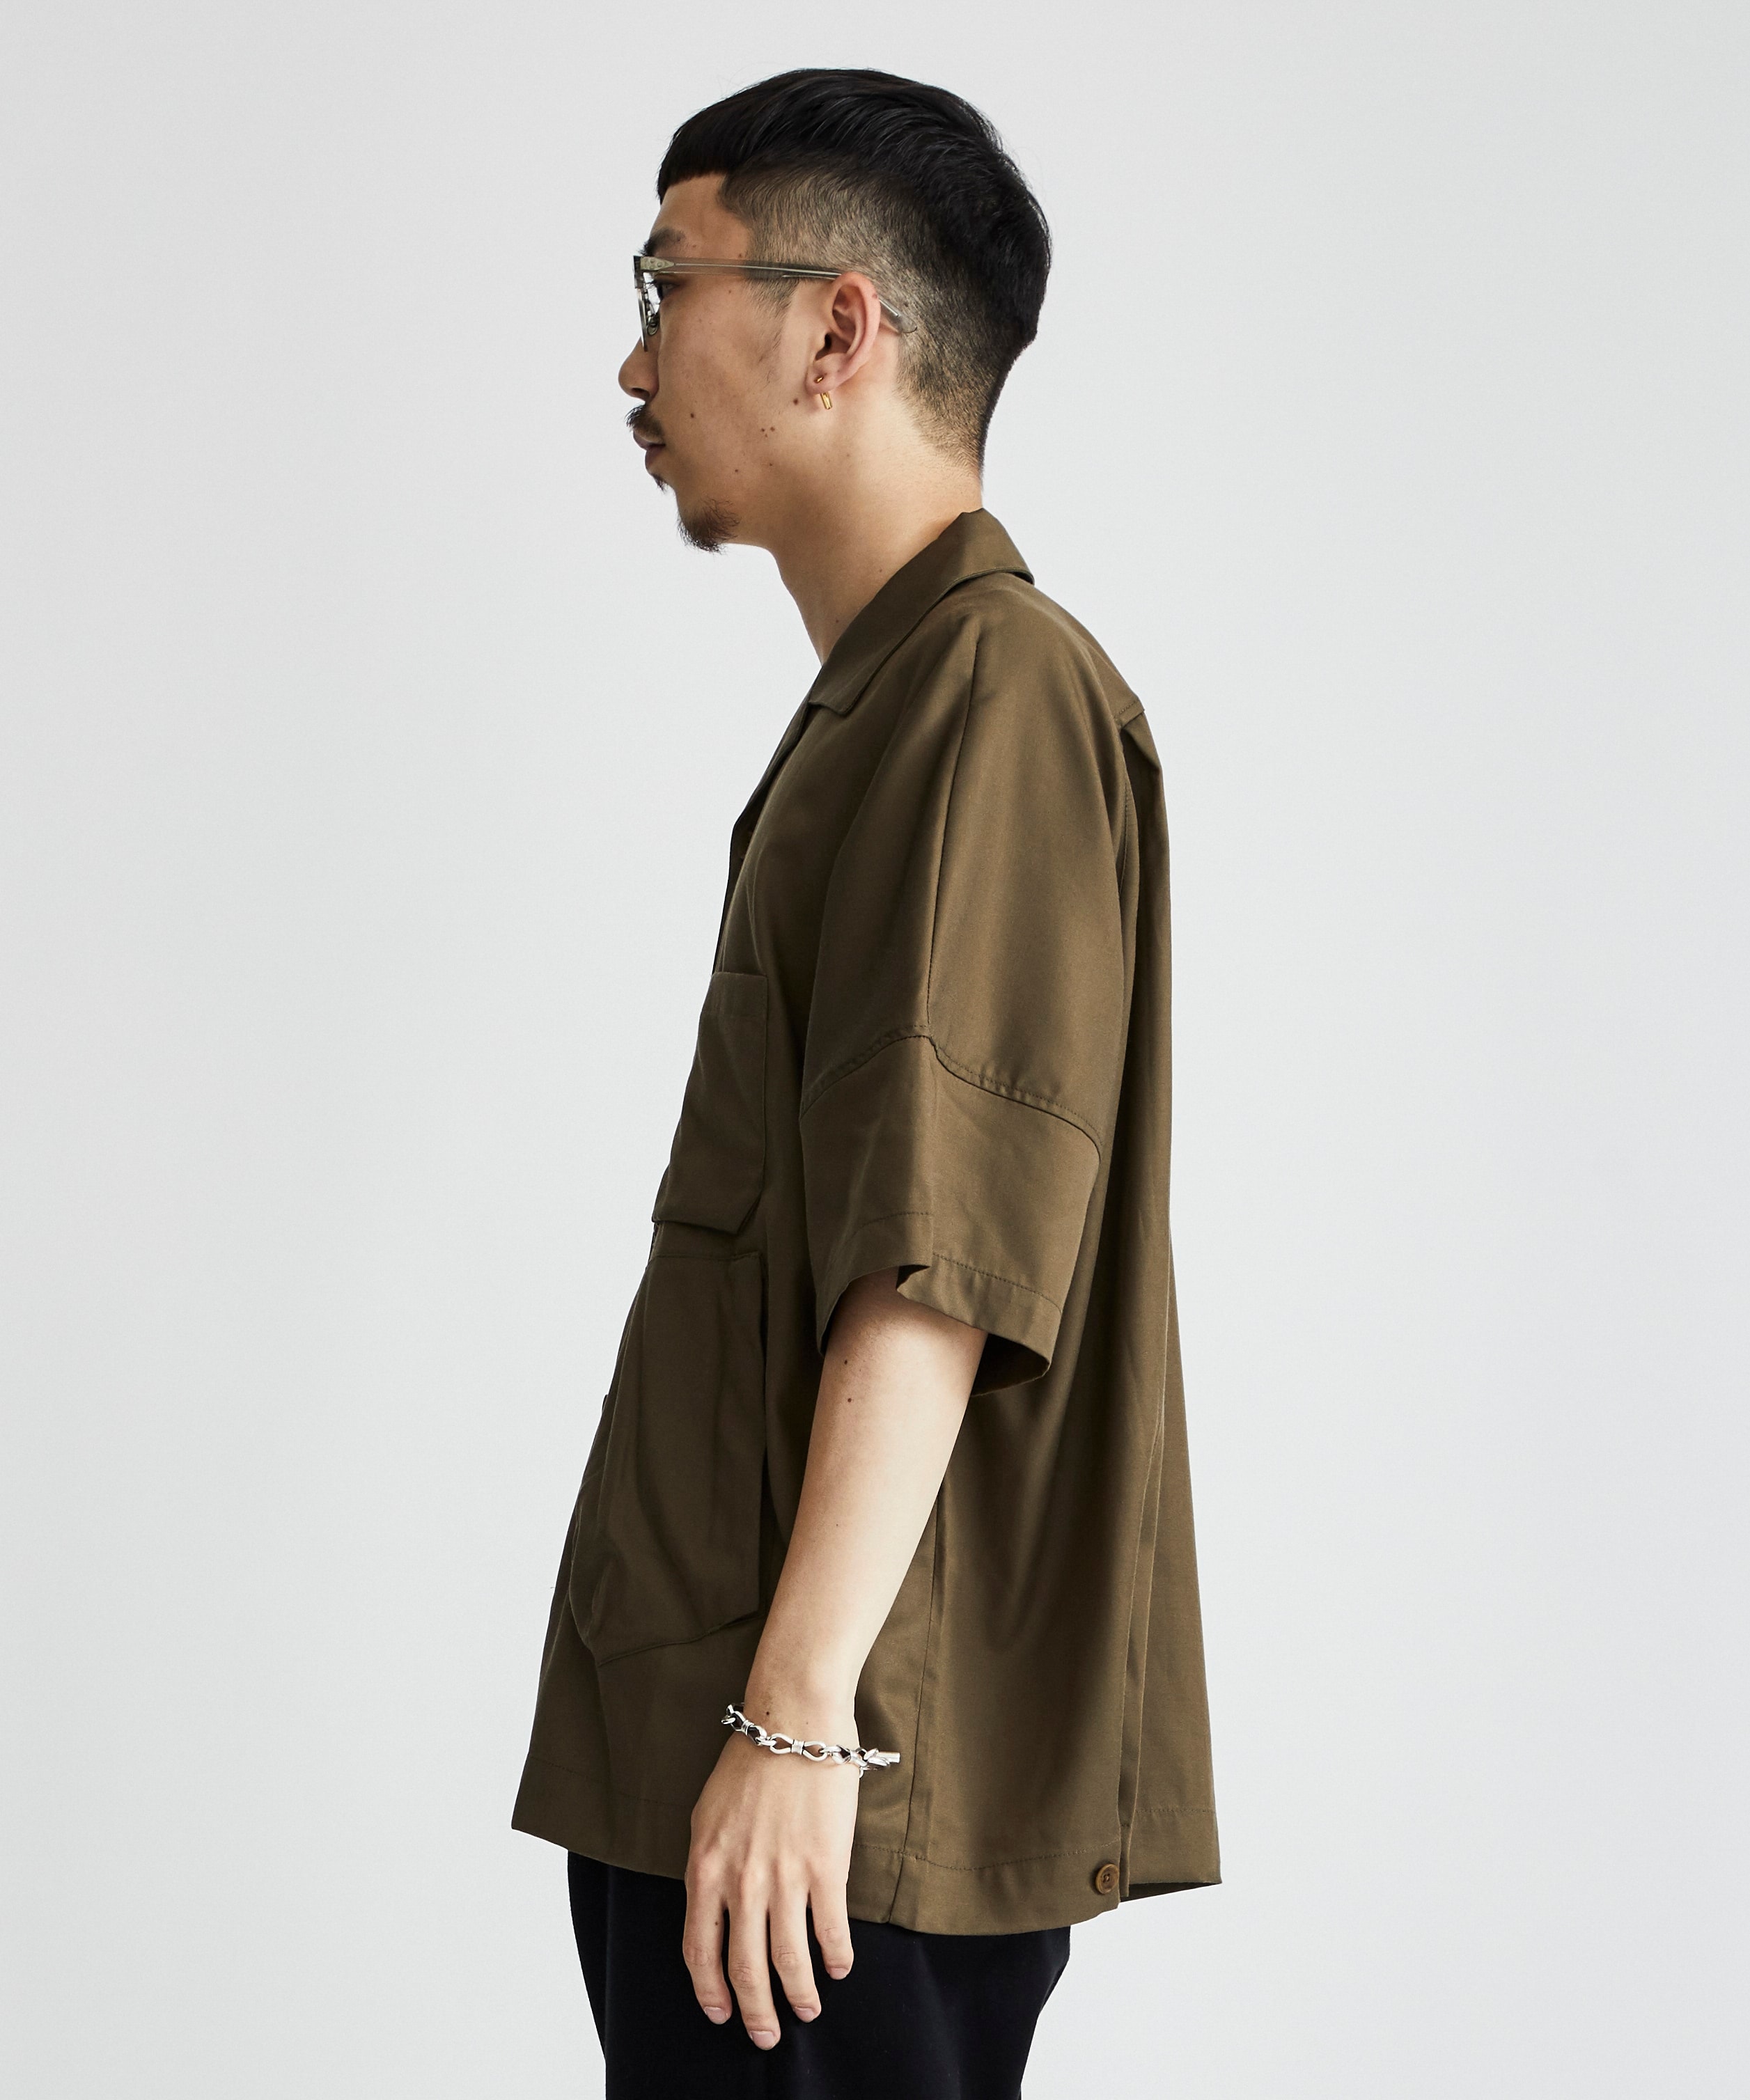 THE DEFORMED LAPELLED COLLAR S/S SHIRTS POLIQUANT